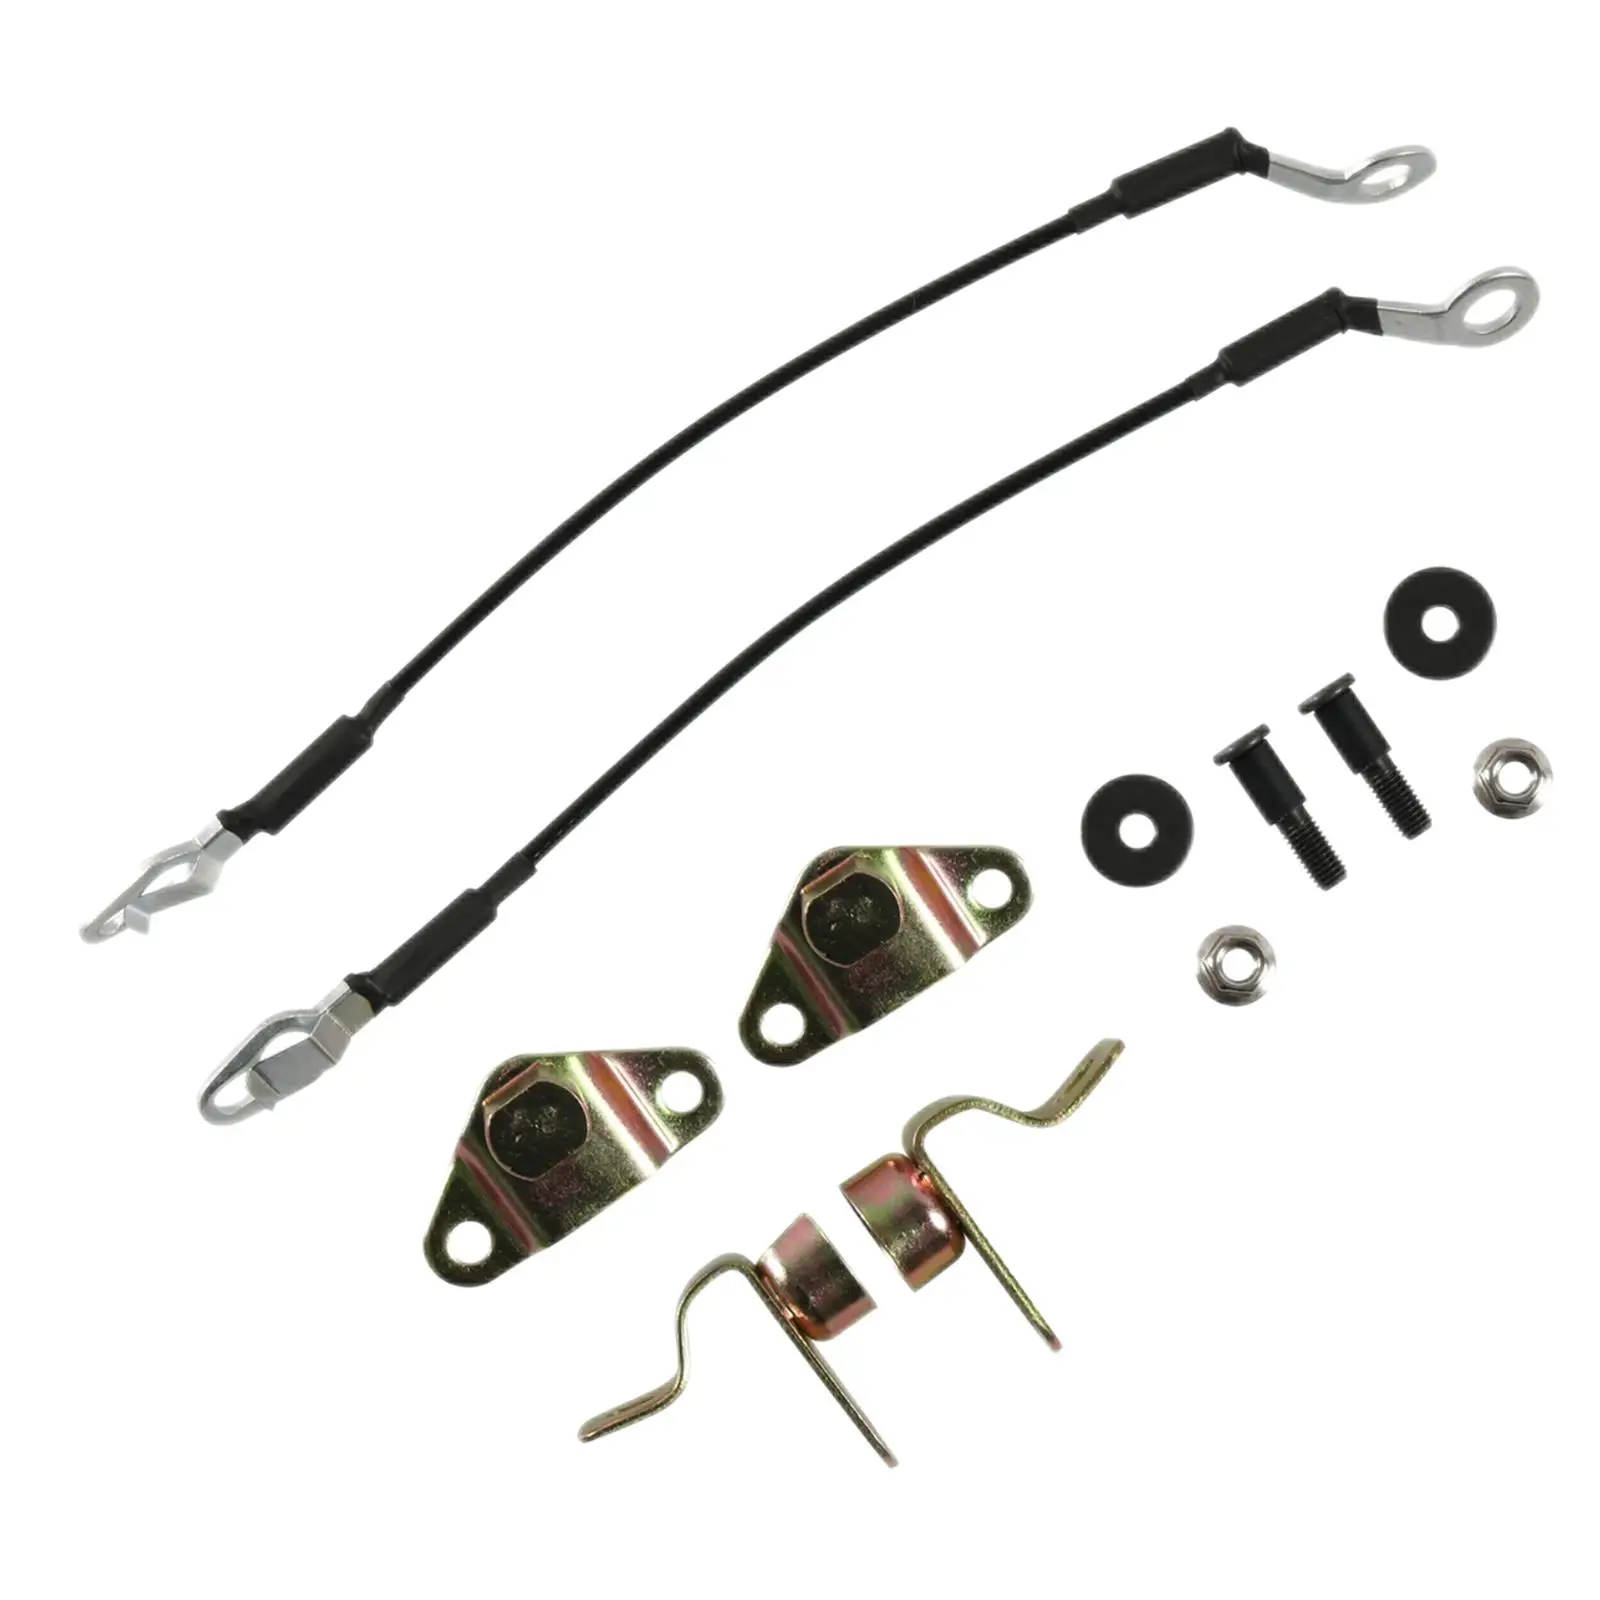 Tailgate Hinges Cables Kit 4 Hinges 2 Cables Bolts Pull Cord Repair Kit Fits for GMC Sierra 1500 2500 3500 HD 88980510 11570162